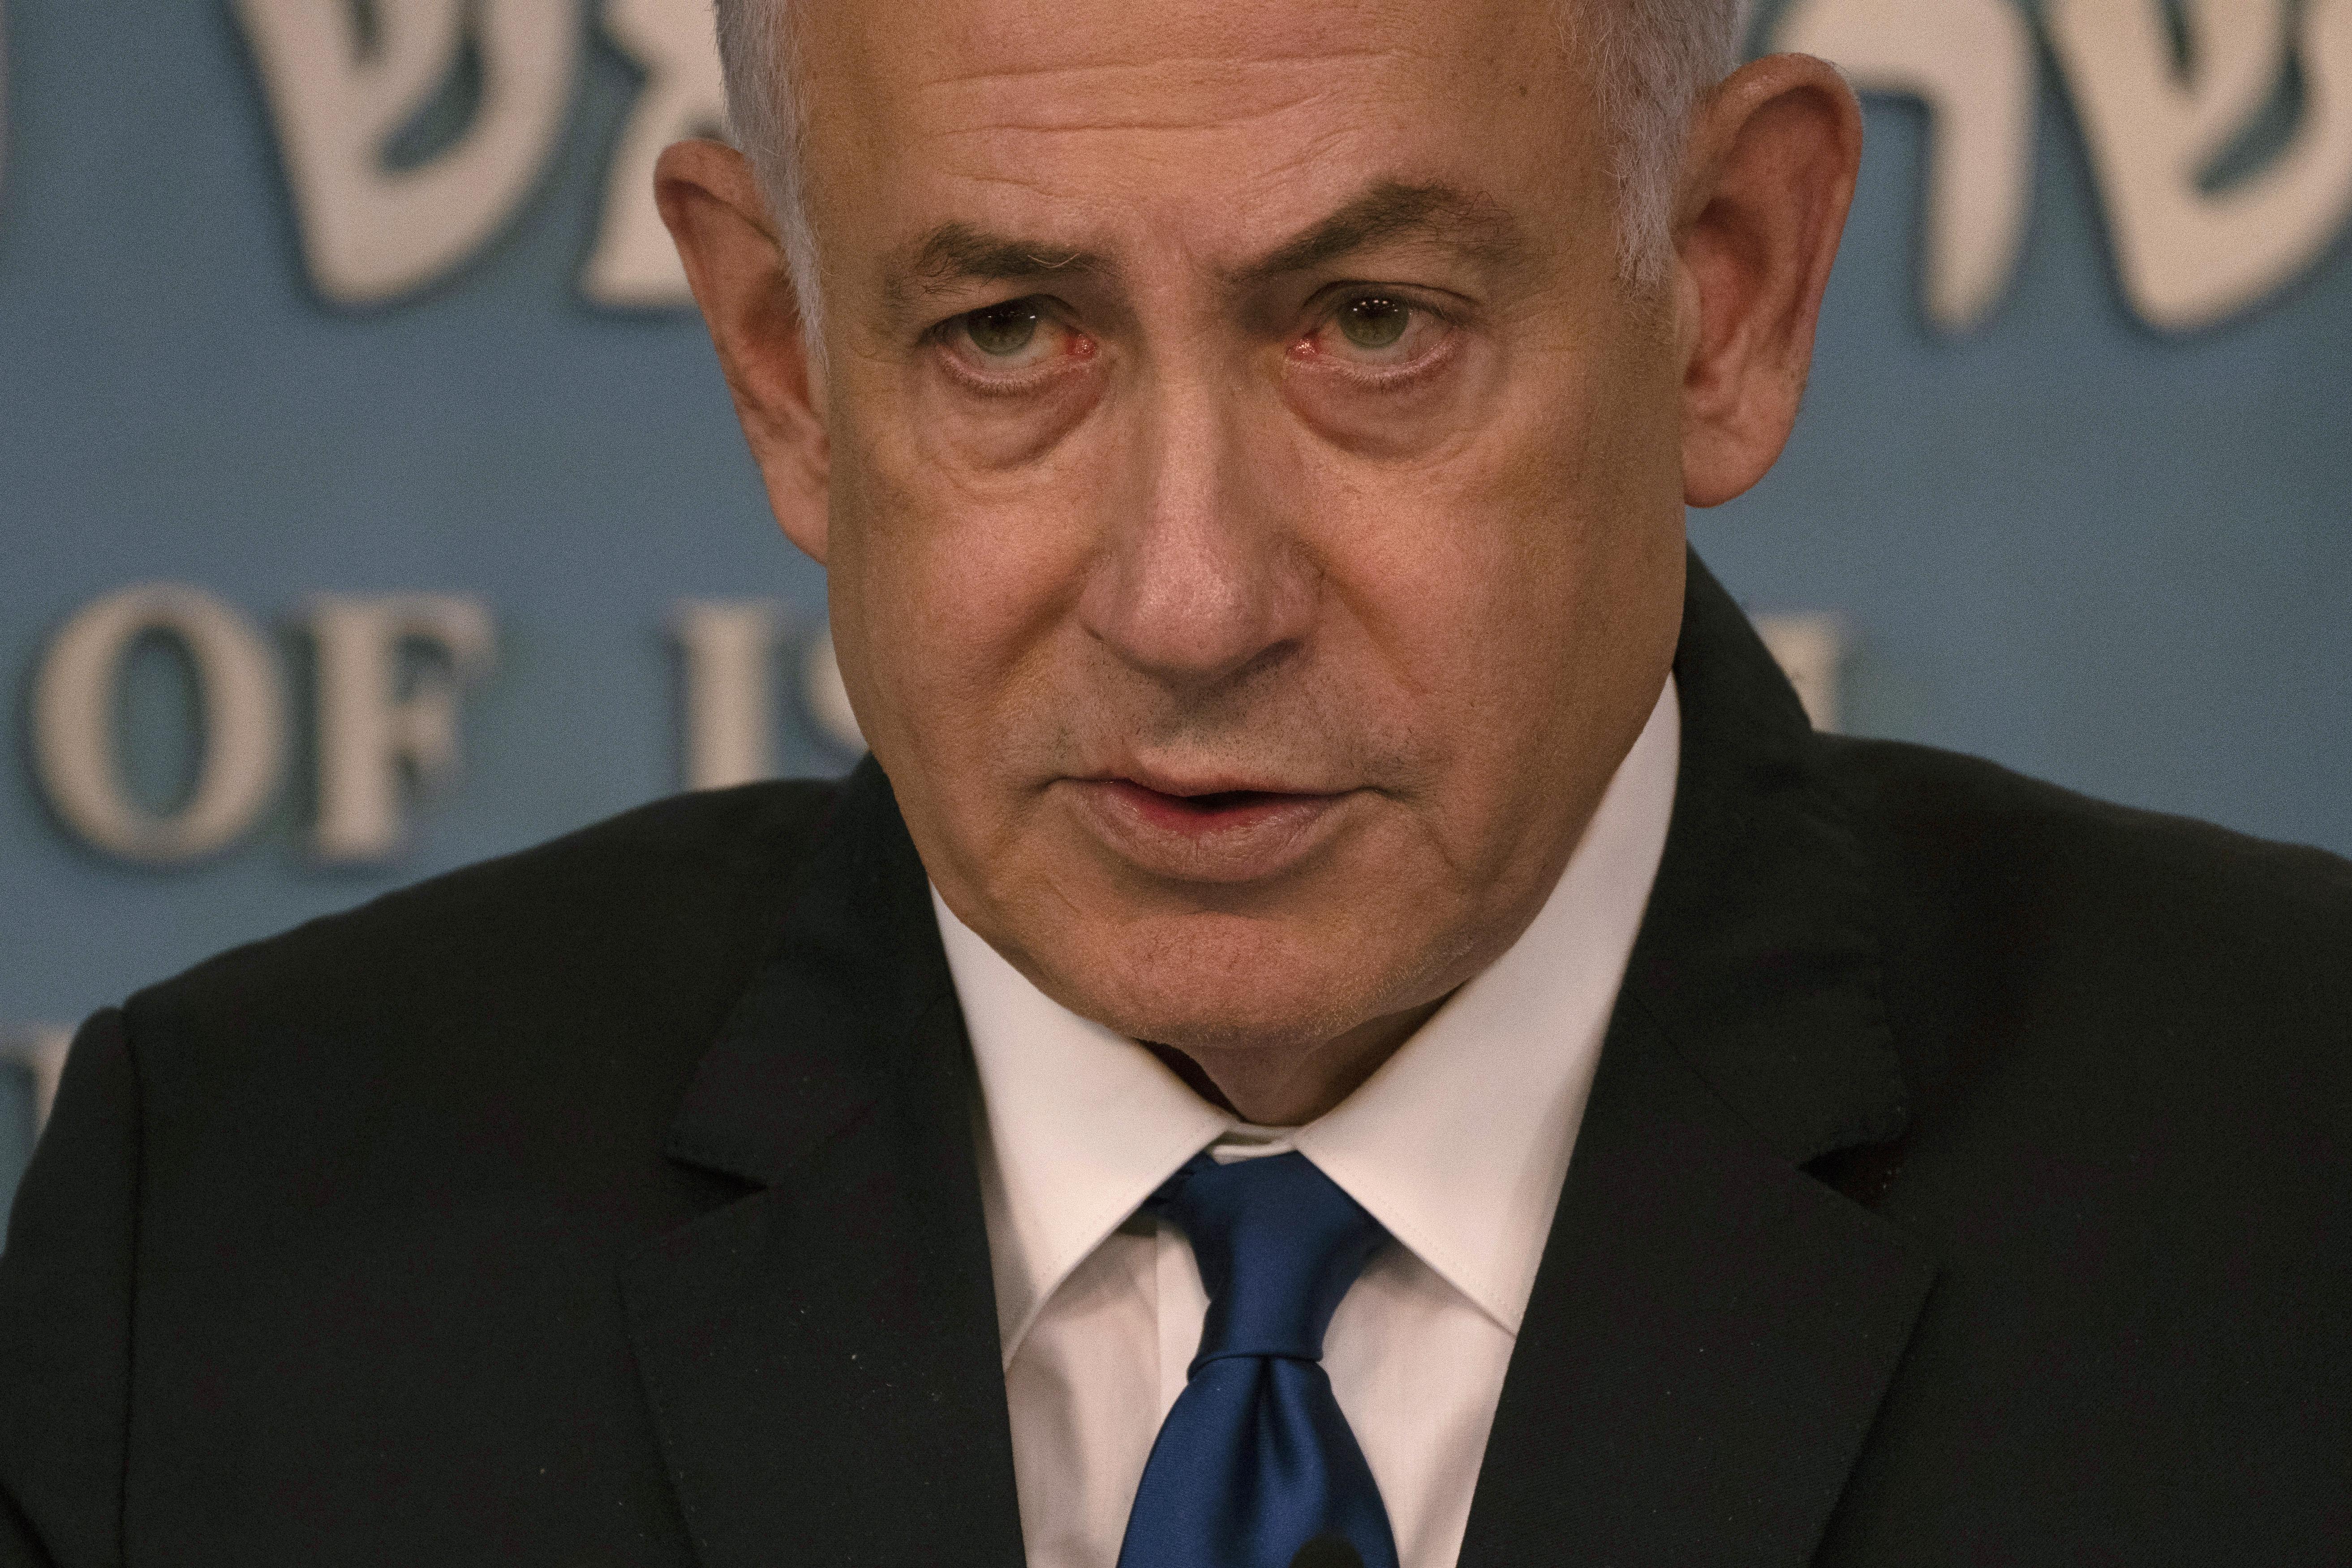 Israel unlikely to just 'take the win' after Iran's unprecedented attack